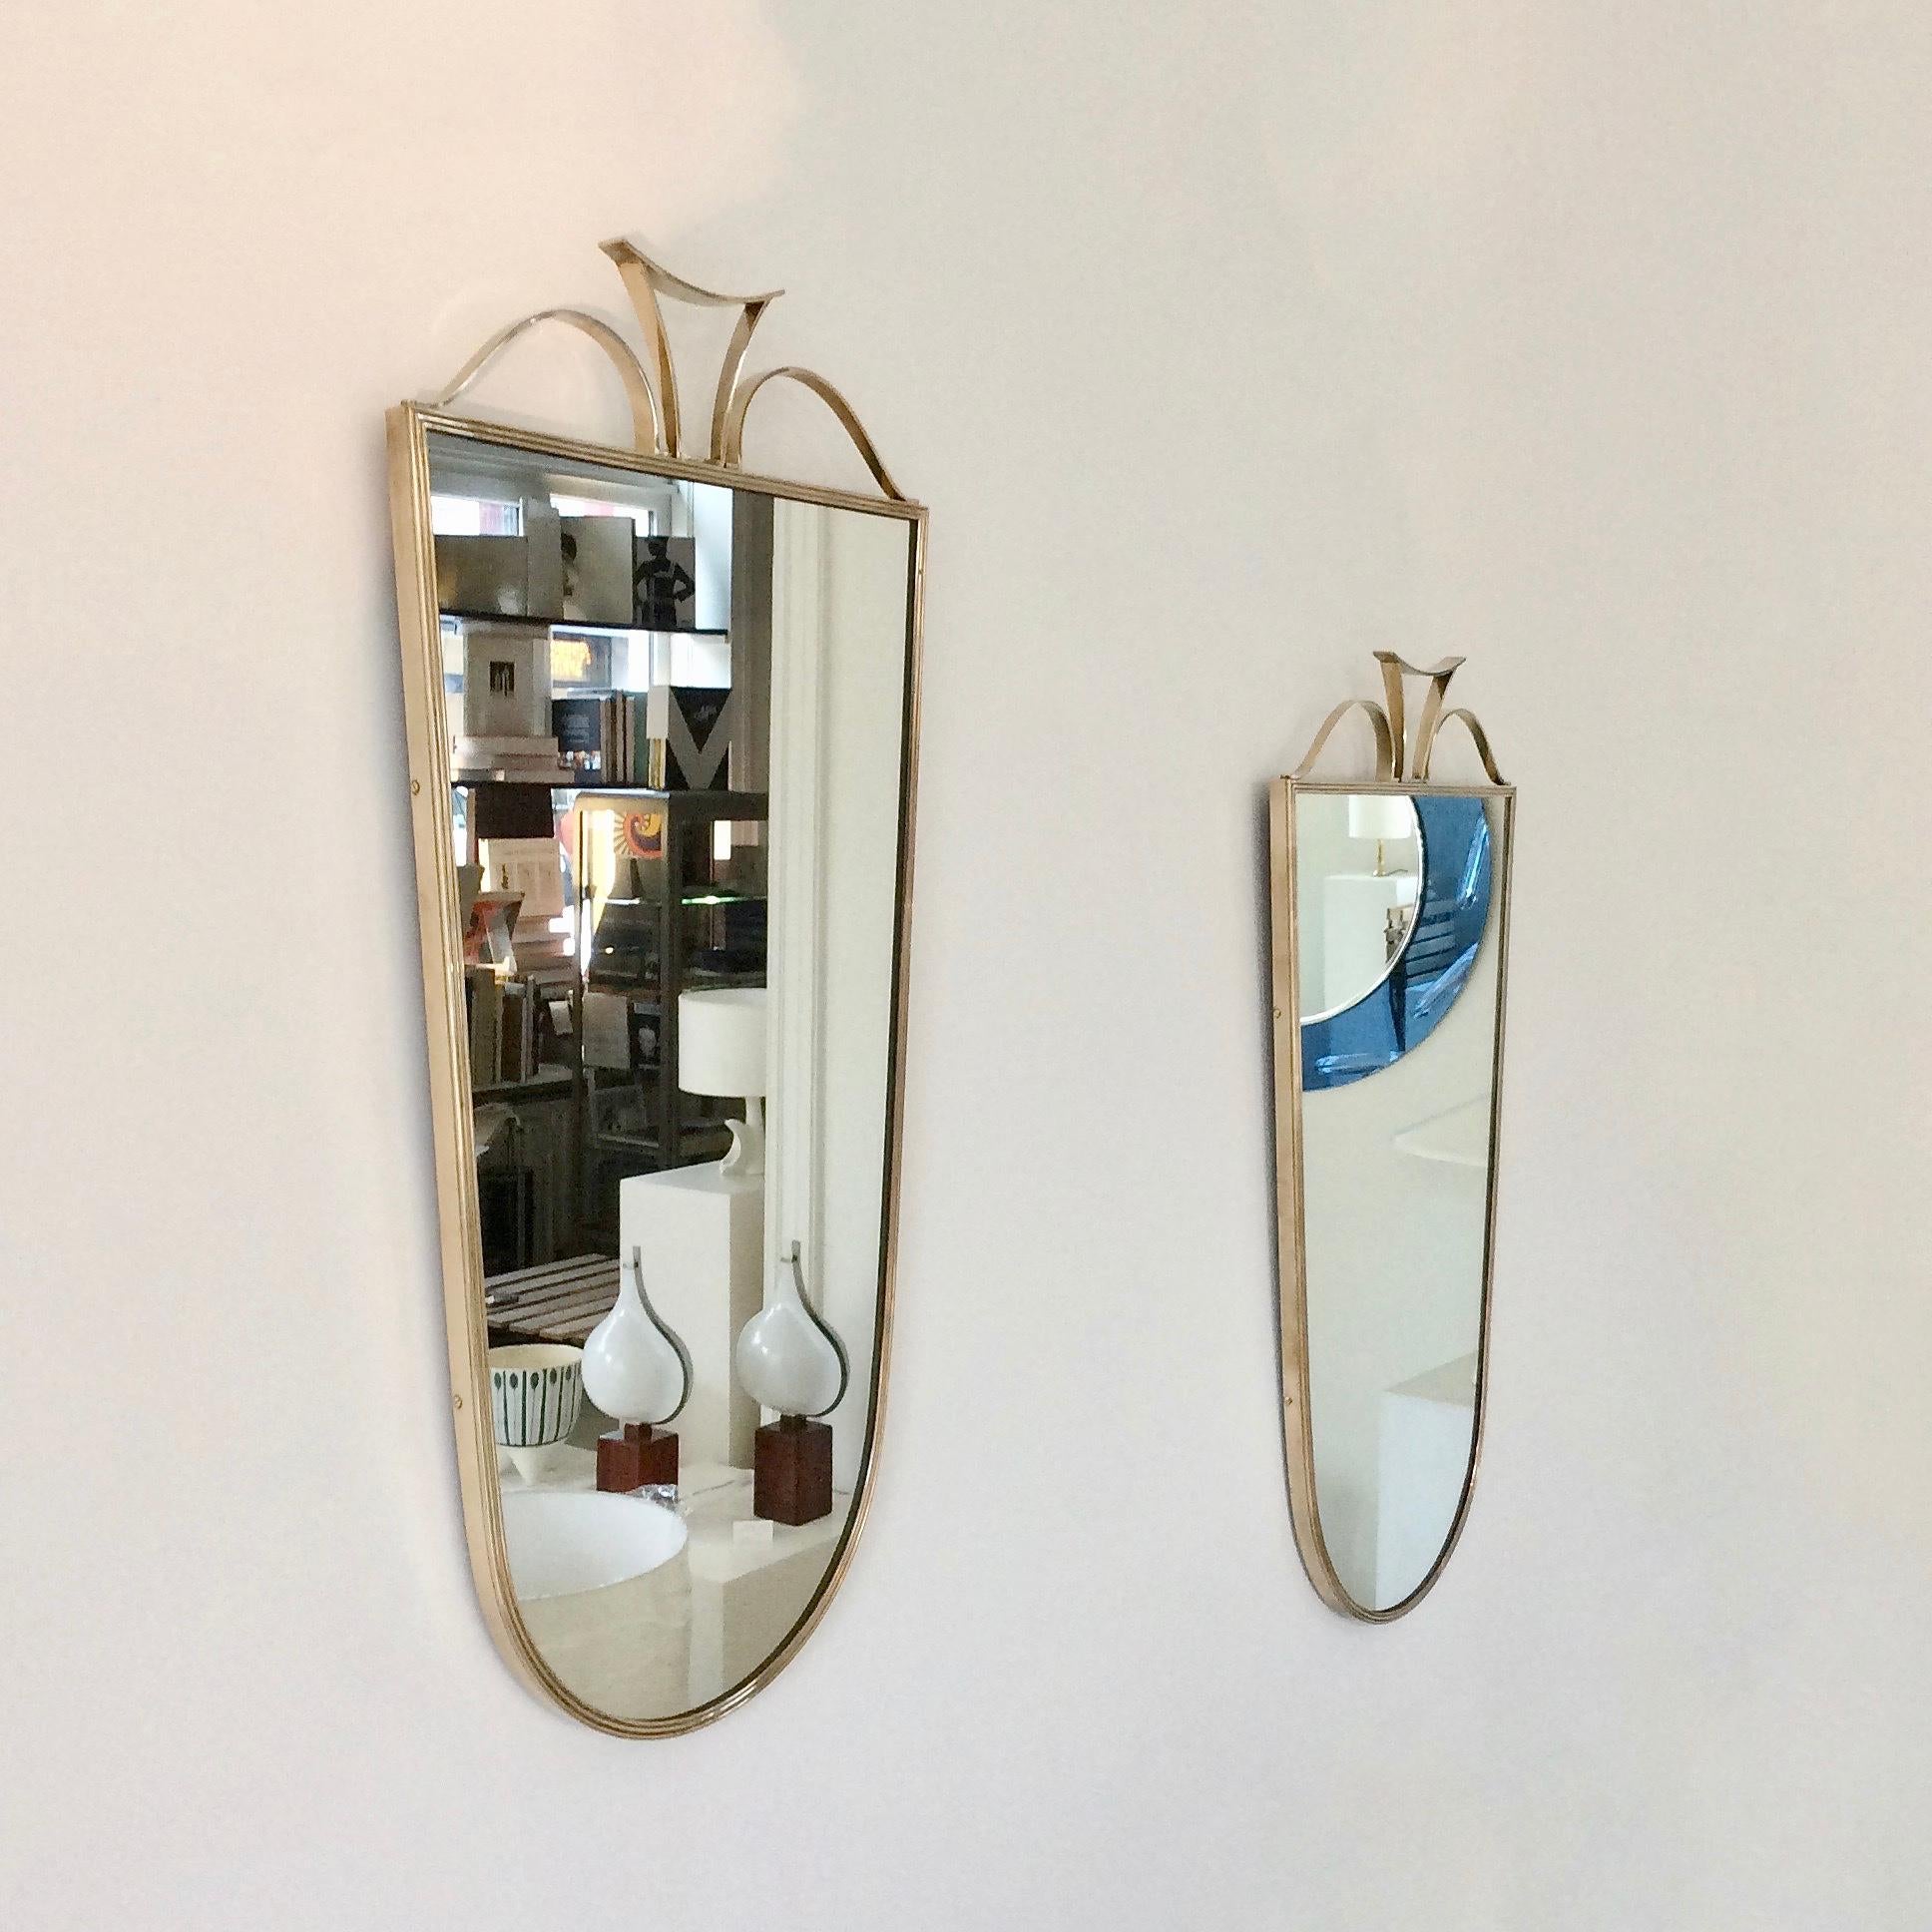 Very elegant pair of wall mirrors, circa 1950, Italy.
Brass and mirrored glass, possibly produced by Fontana Arte.
Good original vintage condition, nice quality.
All purchases are covered by our Buyer Protection Guarantee.
This item can be returned